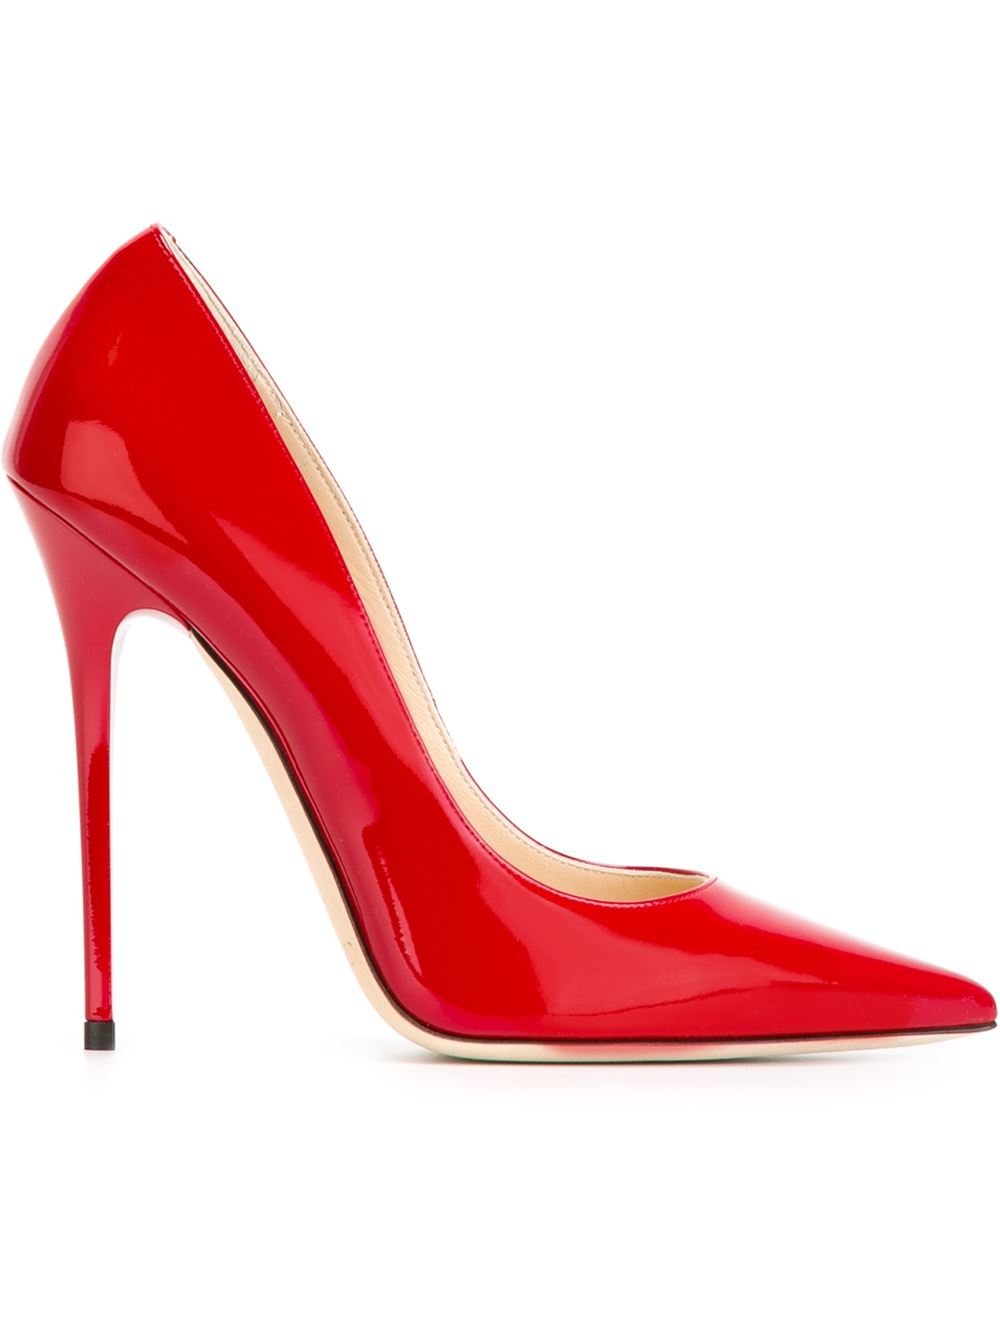 Lyst - Jimmy Choo Anouk Patent-Leather Pumps in Red